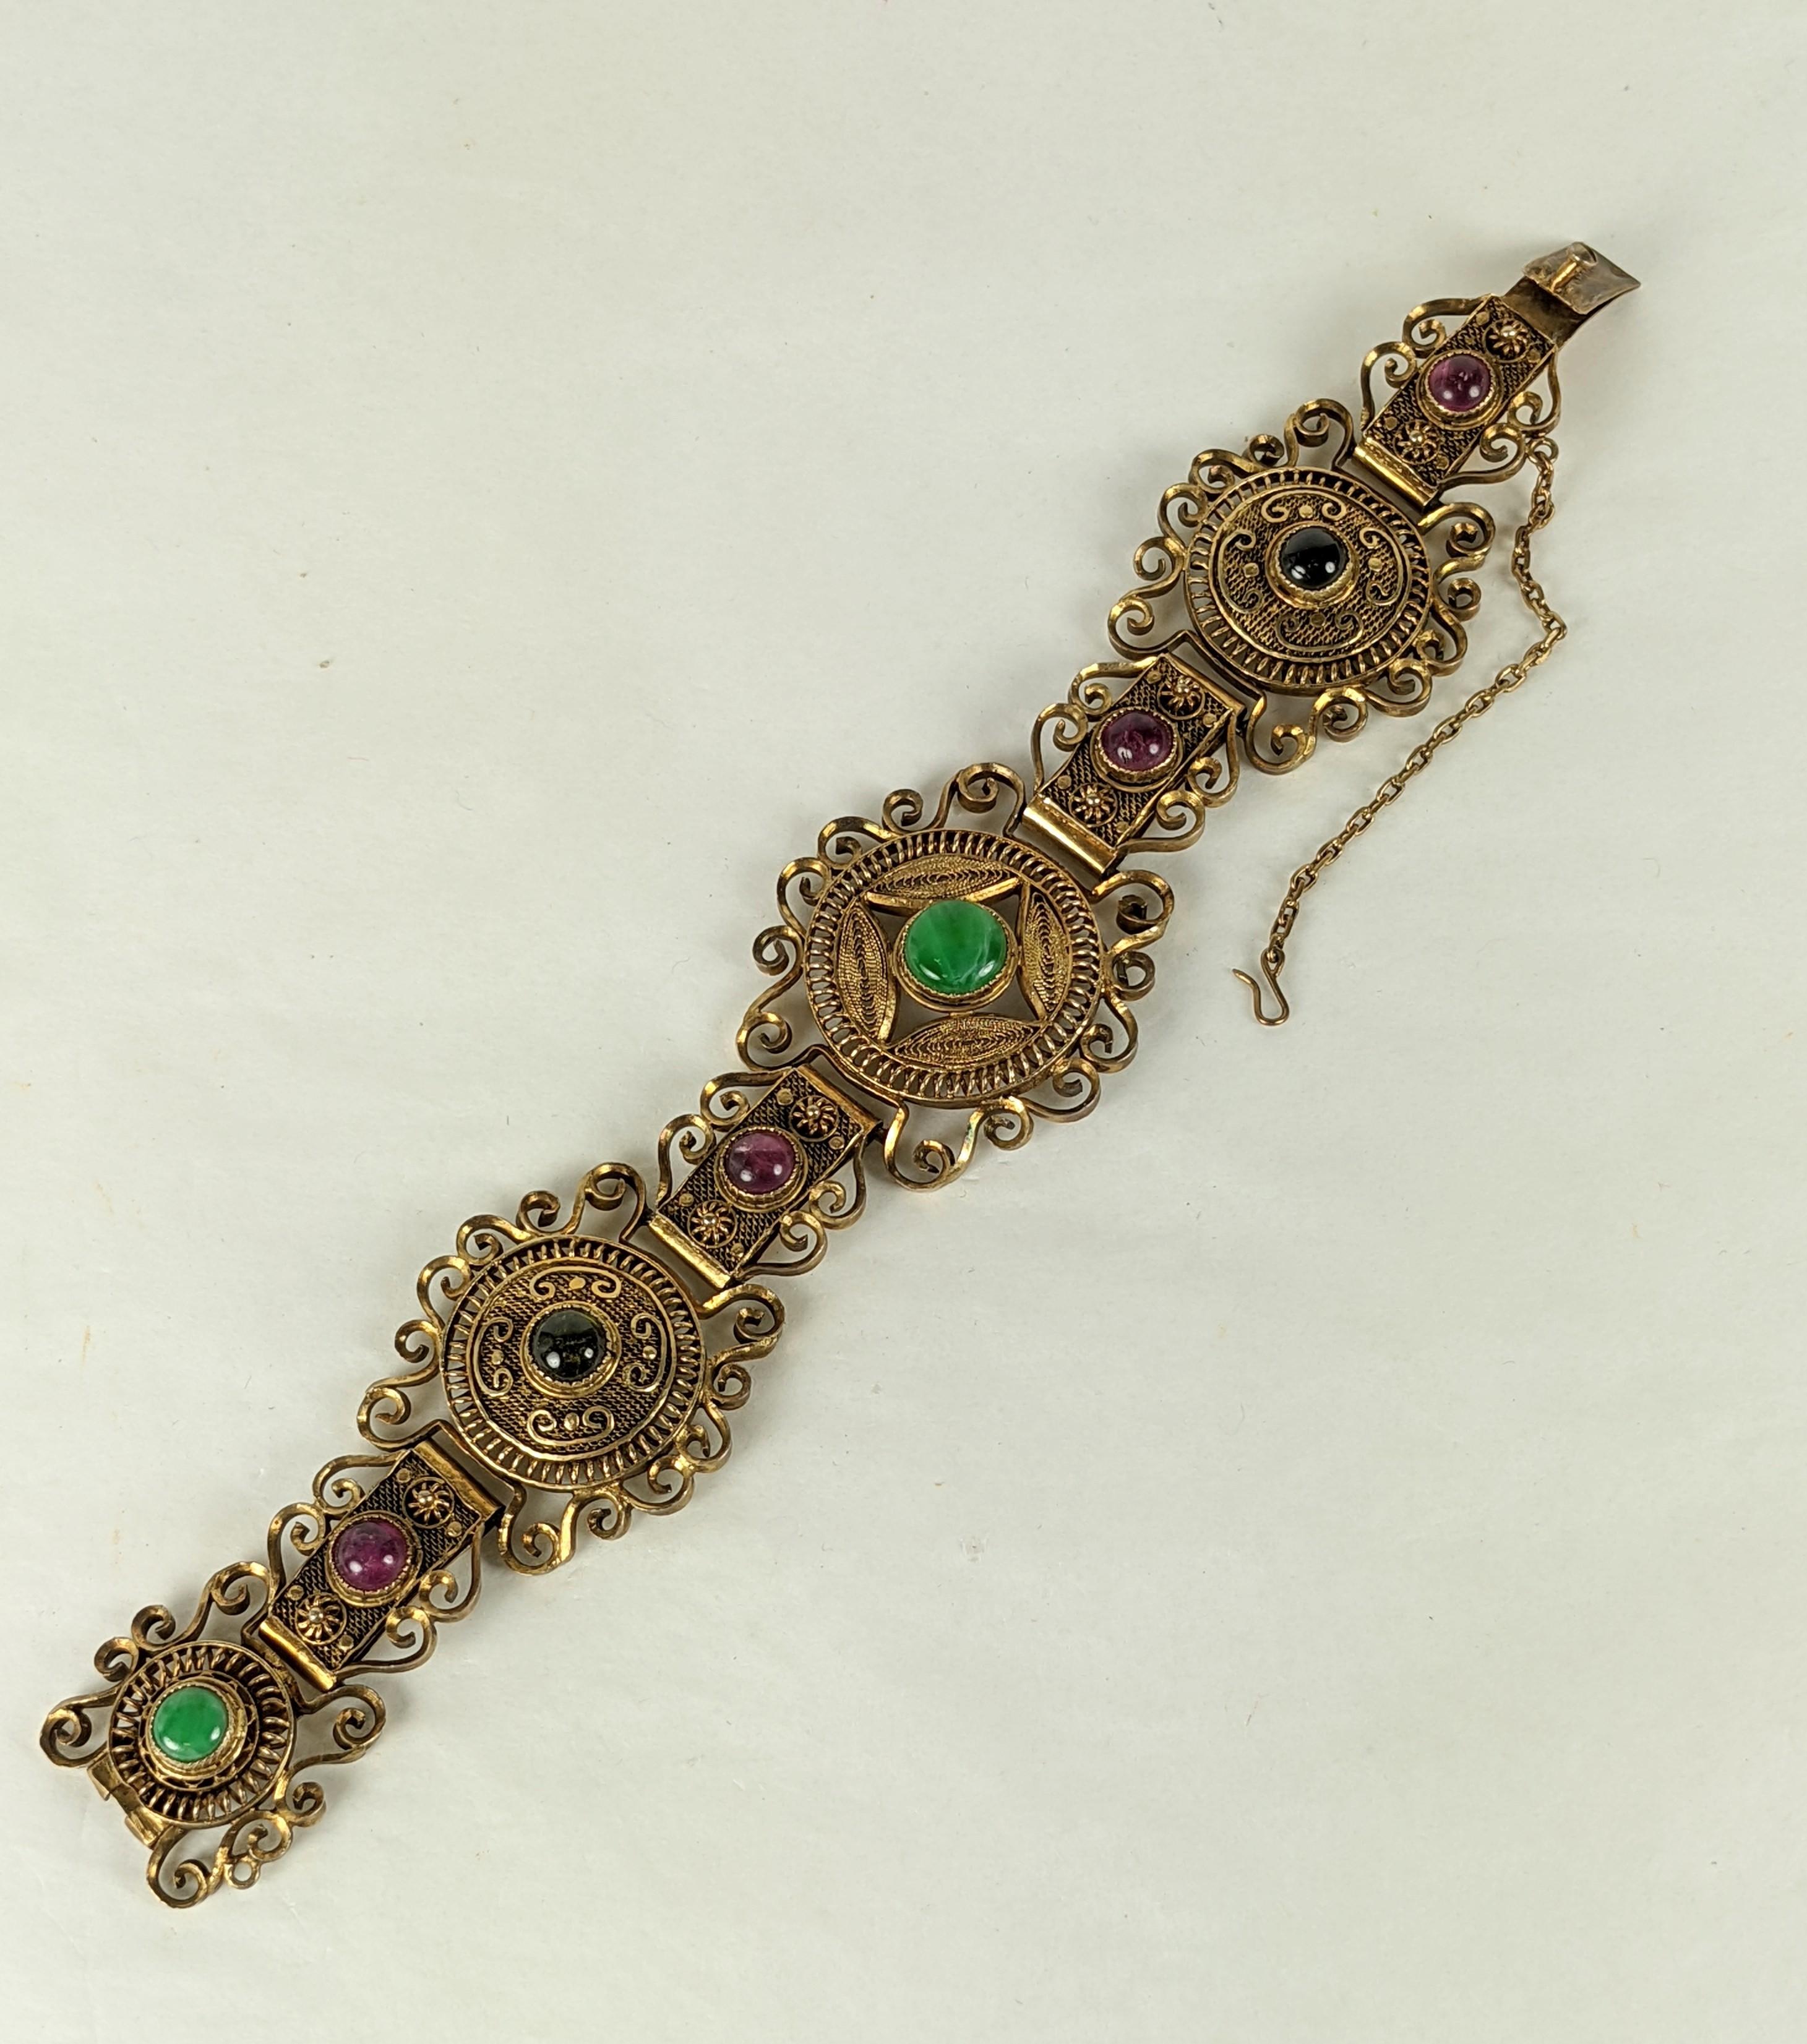 Lovely Chinese Silver Vermeil Bracelet with Gemstones cabochons in pink and green tourmalines with jade. Bracelet is widest at center with 3 central round motifs, all decorated with ornate hand made filigree work.  Measures 7